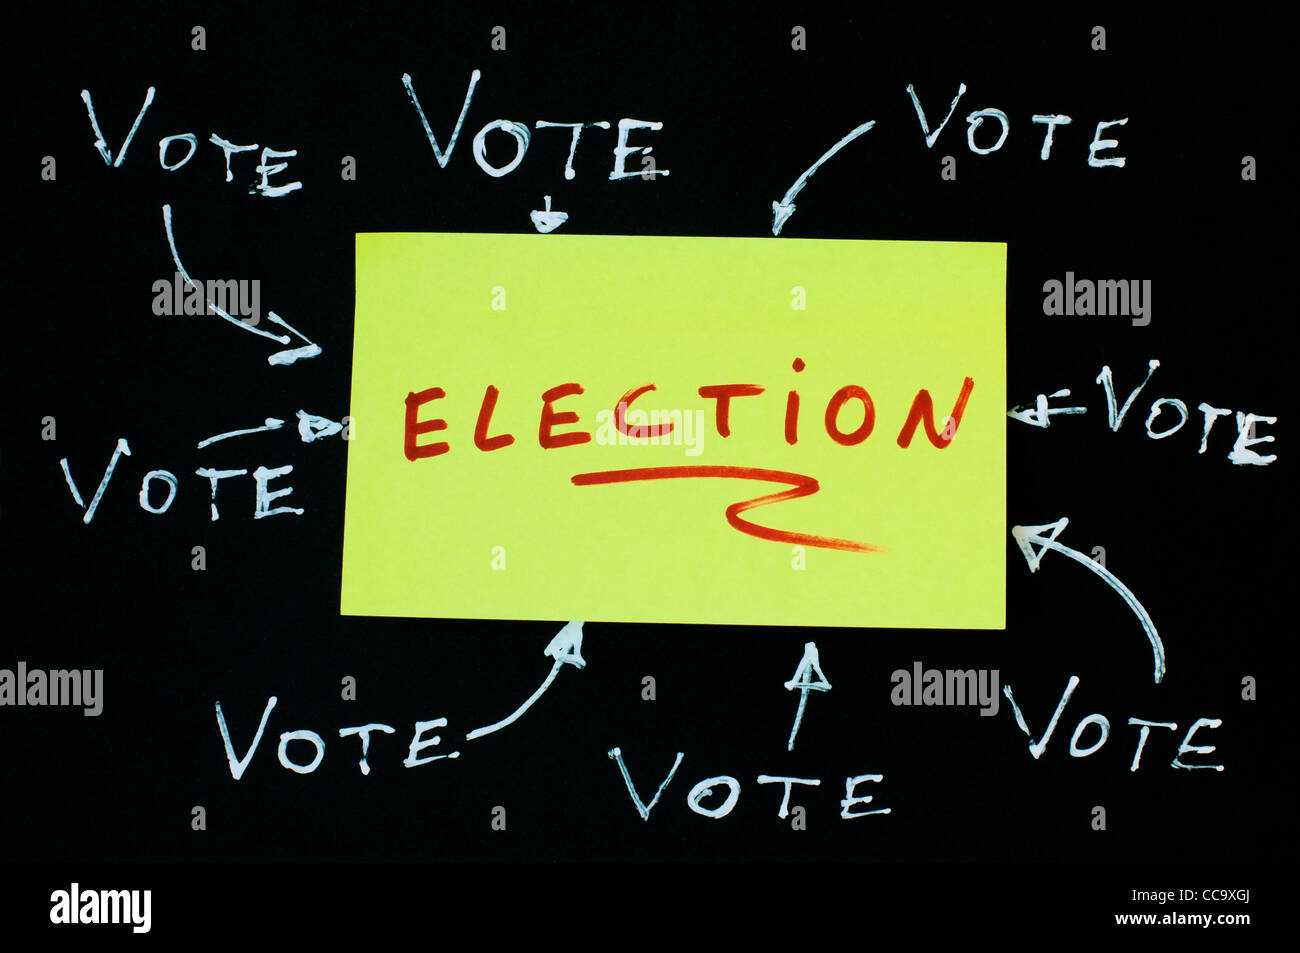 Elections text conception over black. Vote and election text Stock Photo